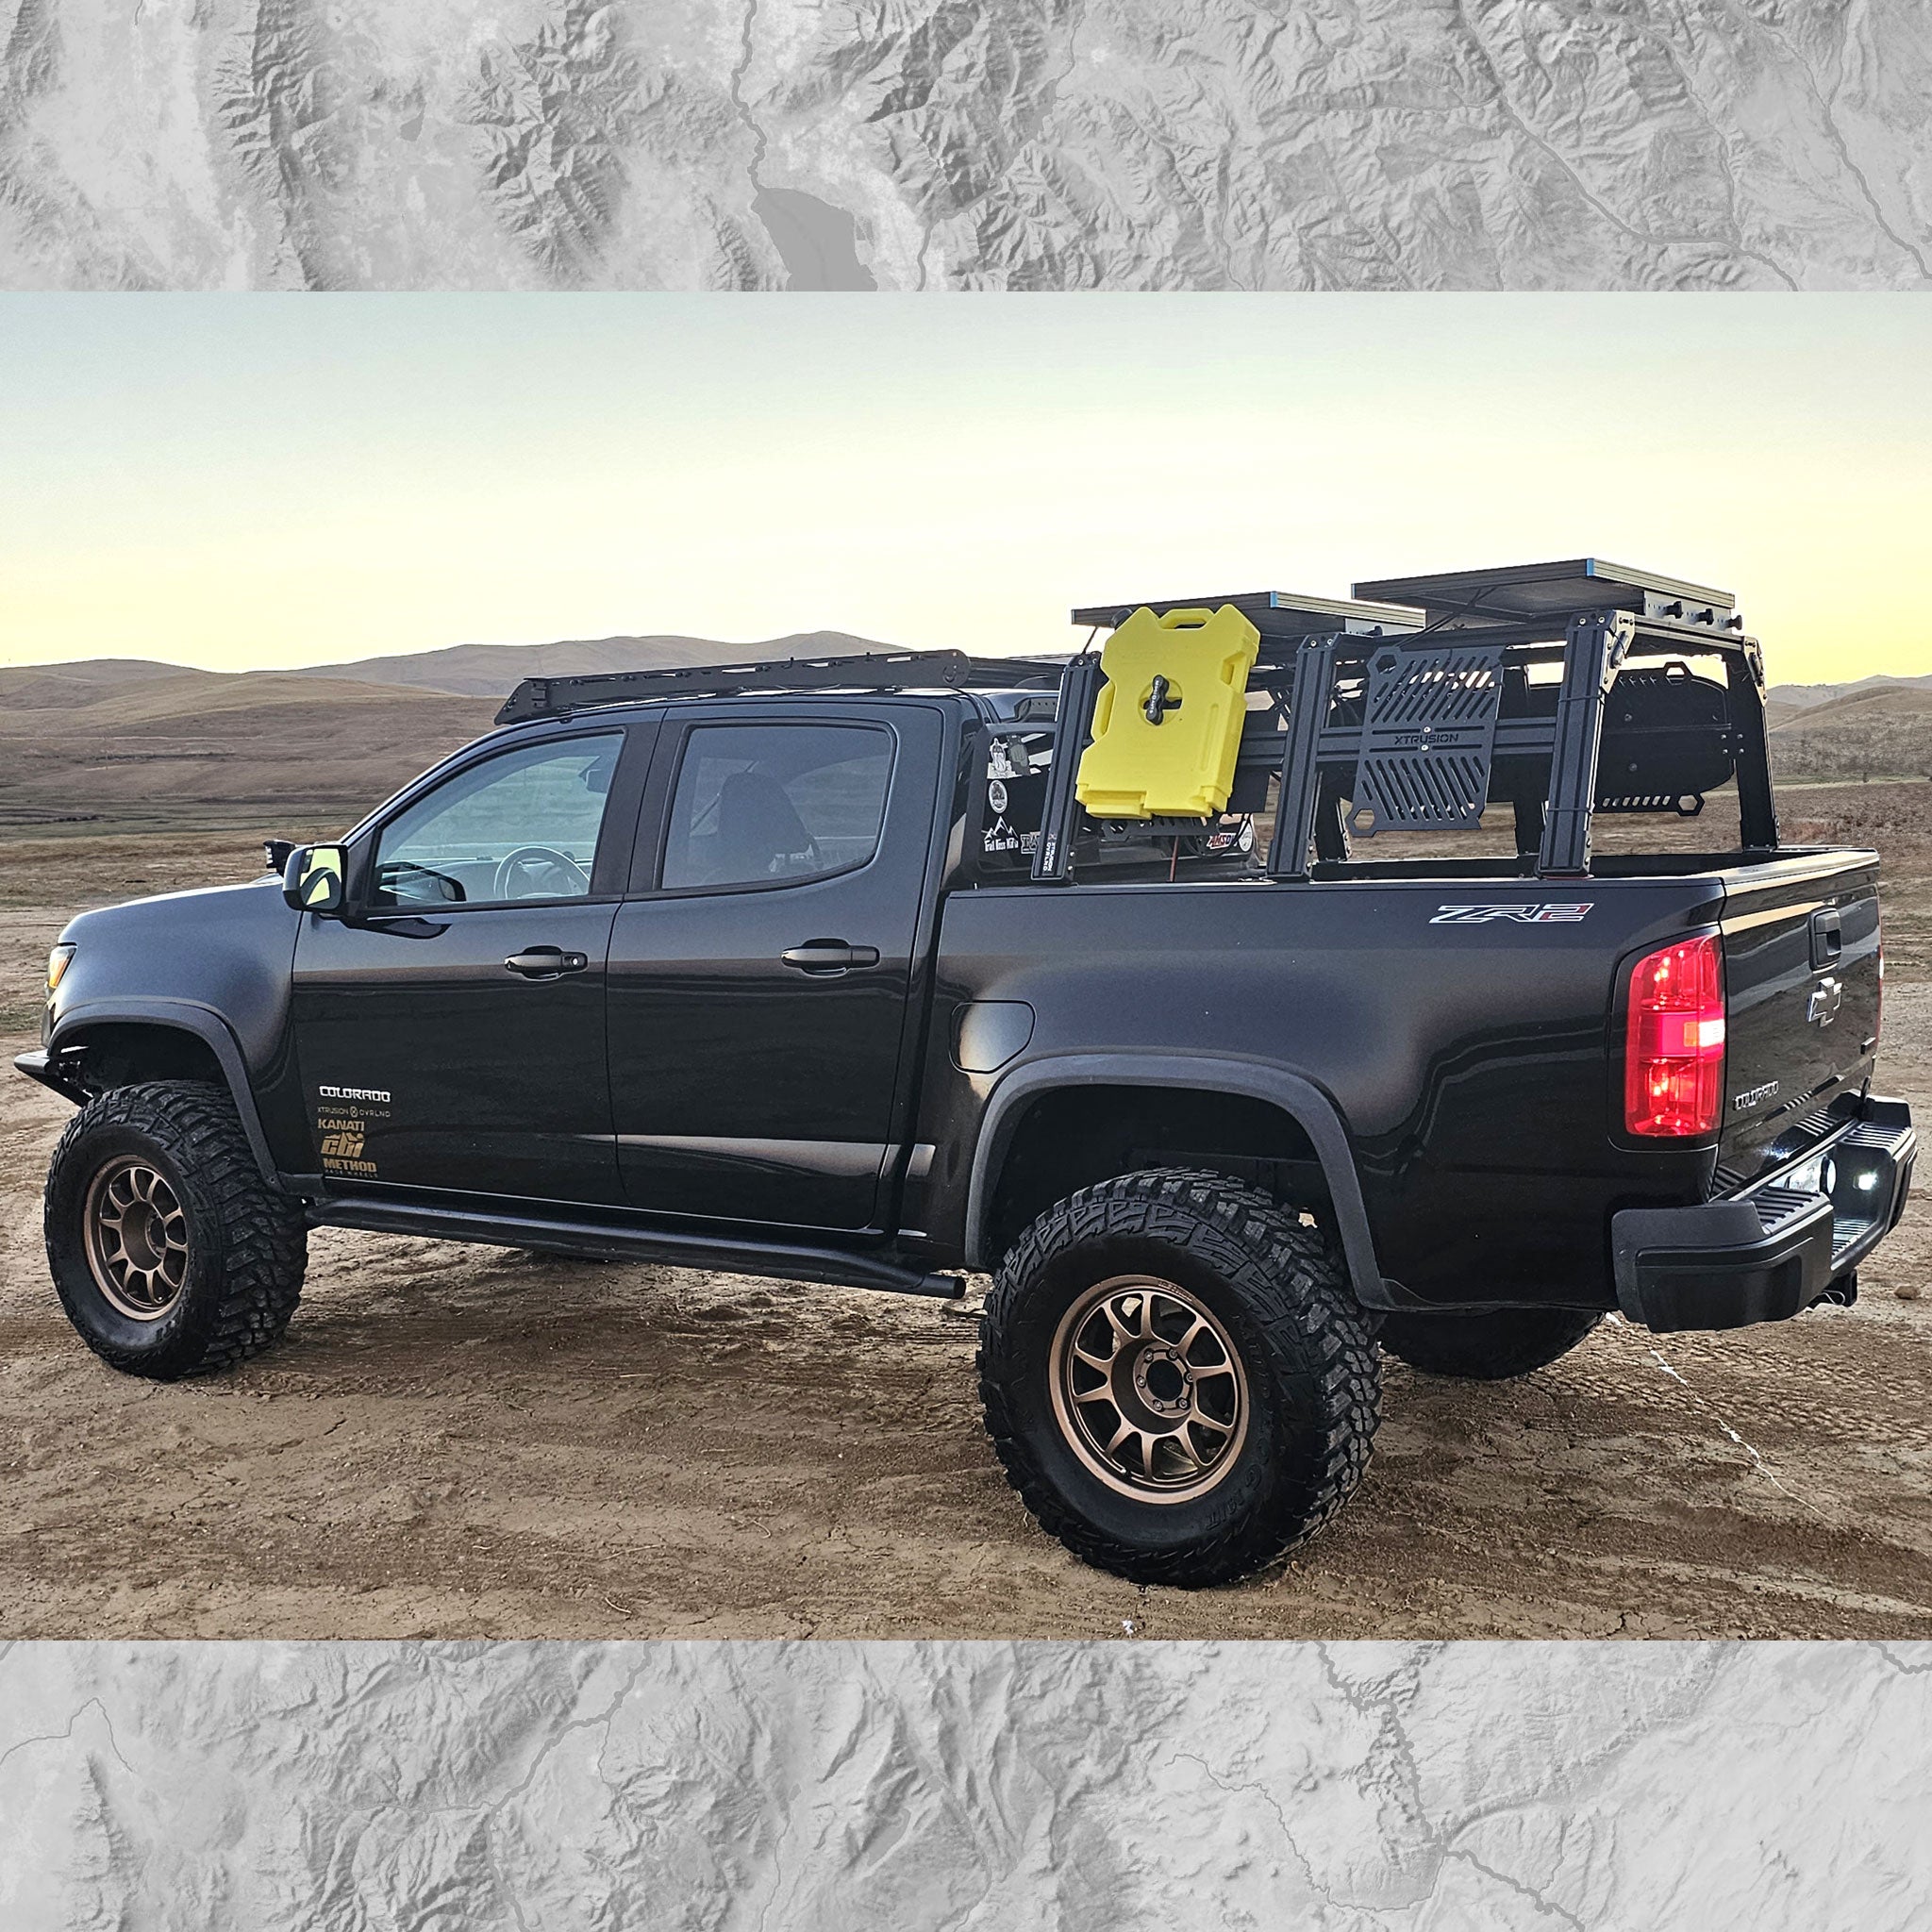 Chevy Colorado ZR2 with XTR3 Overland Bed Rack, Molles, Traction Boards, RotoPax, Awning,, and Solar panels.